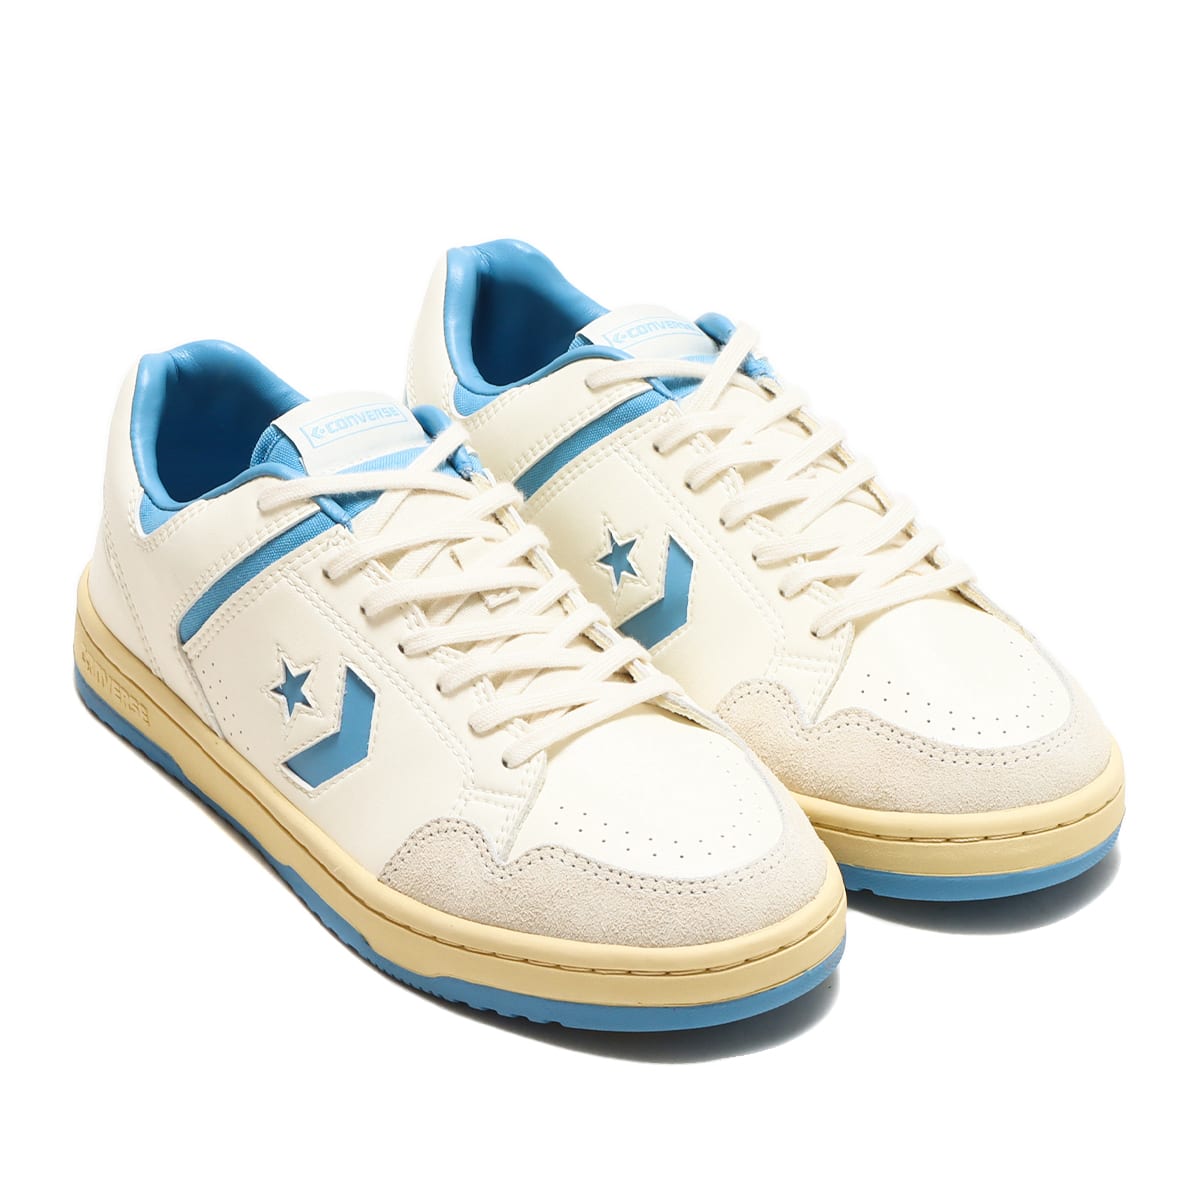 CONVERSE WEAPON SK OX WHITE/LIGHT BLUE 23SS-I_photo_large